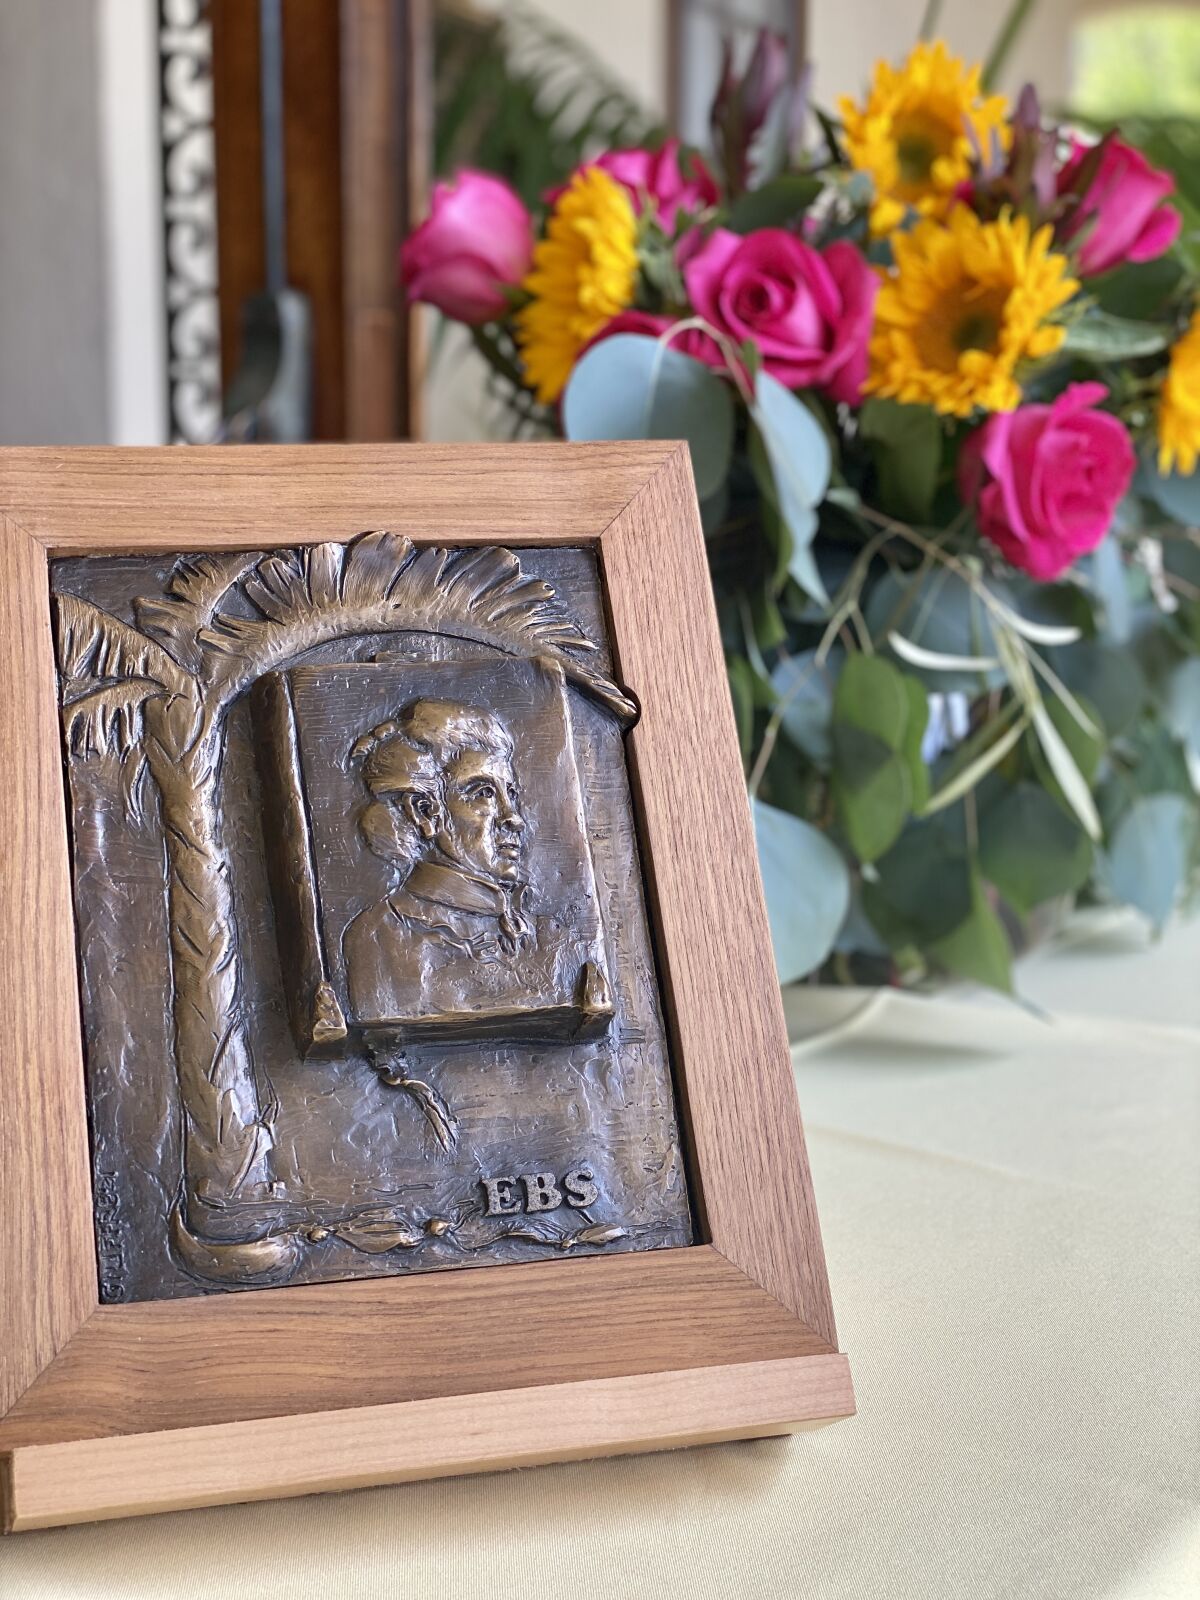 The La Jolla Woman’s Club unveiled a bronze bas relief of Ellen Browning Scripps.